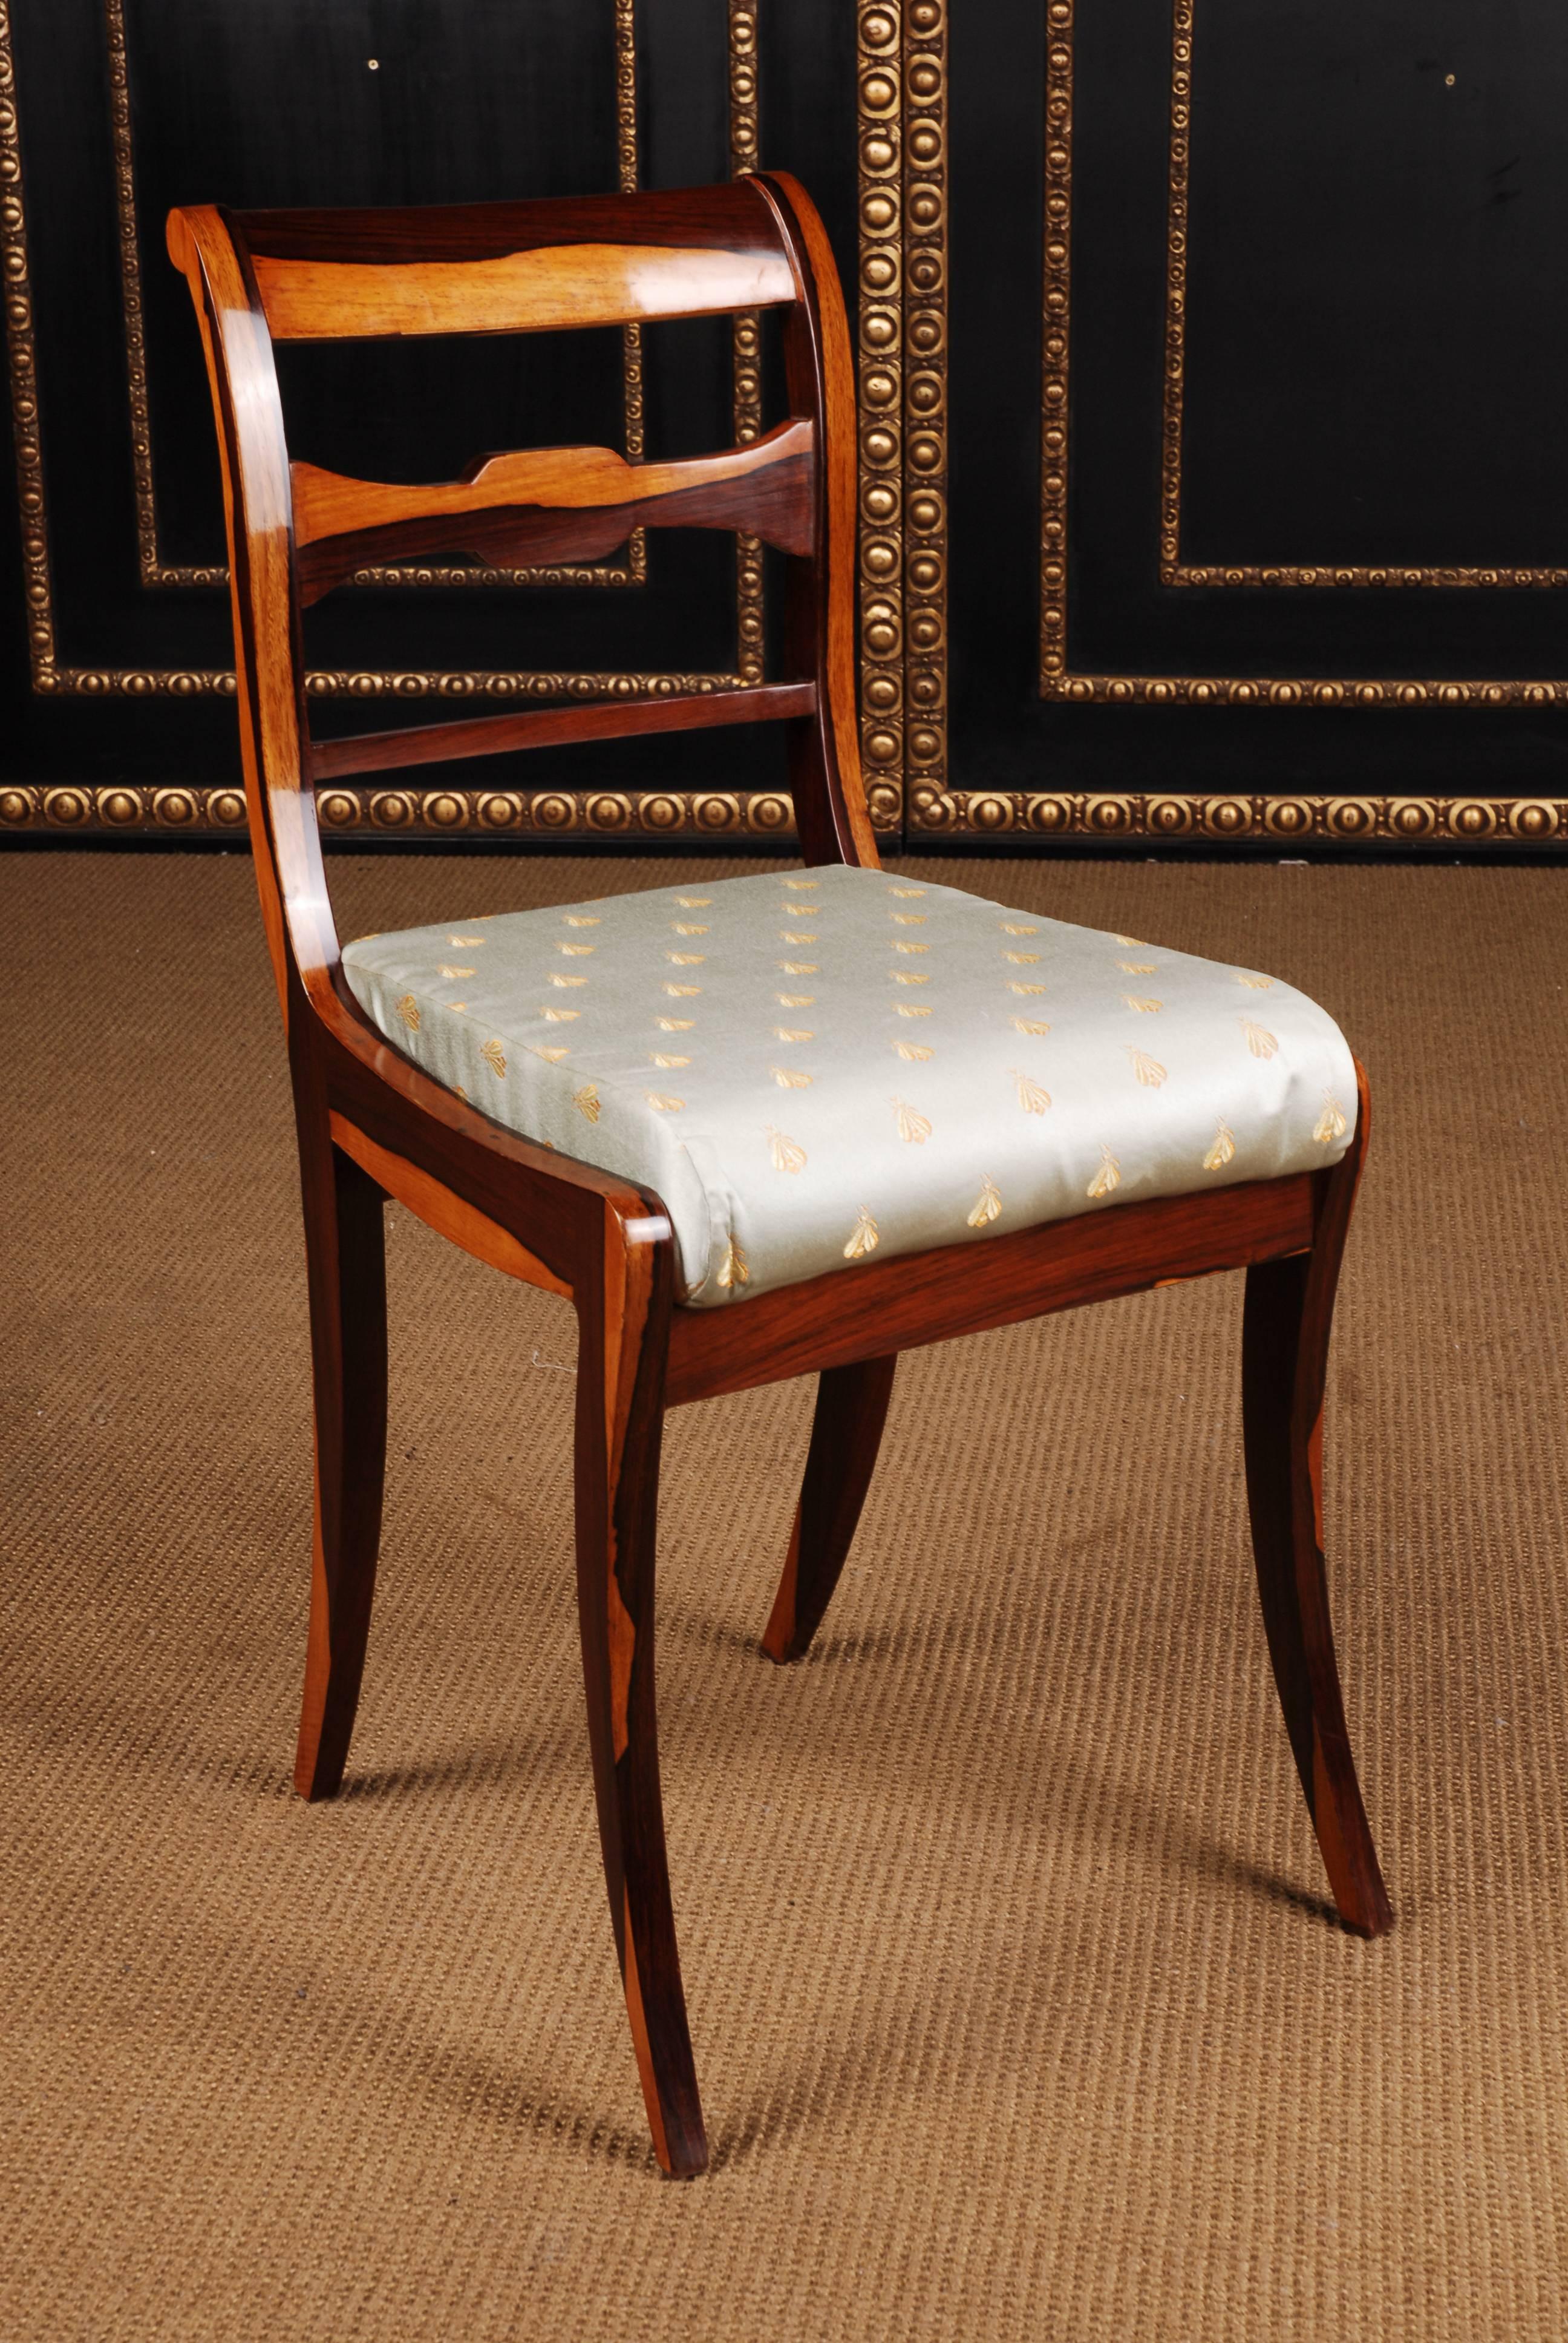 Solid beechwood with Palisander veneer. Elegantly curved saber-shaped legs in a straight frame. High-arched curved backrest, in the center medallion-shaped middle bridge. A very nice chair with a perfect proportion. Classically upholstered seat,